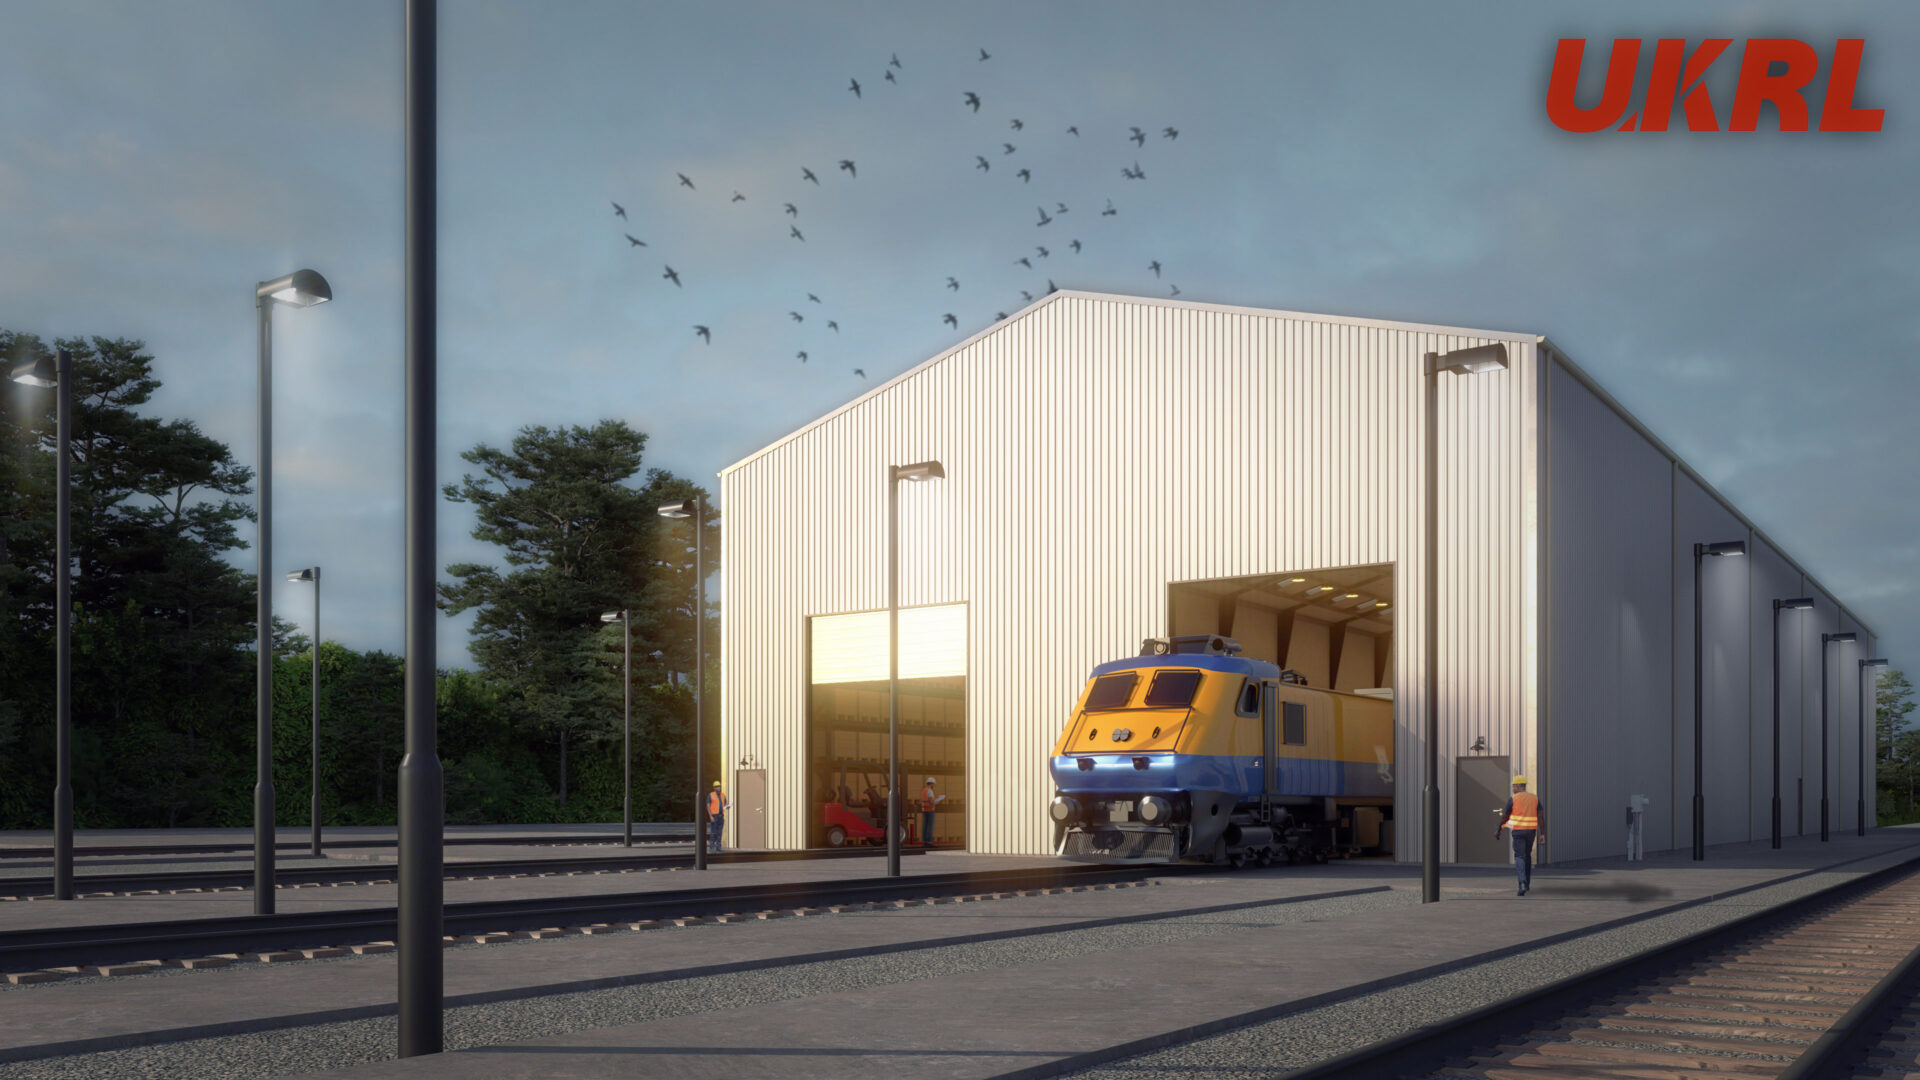 Image for article: UKRL announces start of construction of a new £1.5 locomotive maintenance facility at Leicester depot